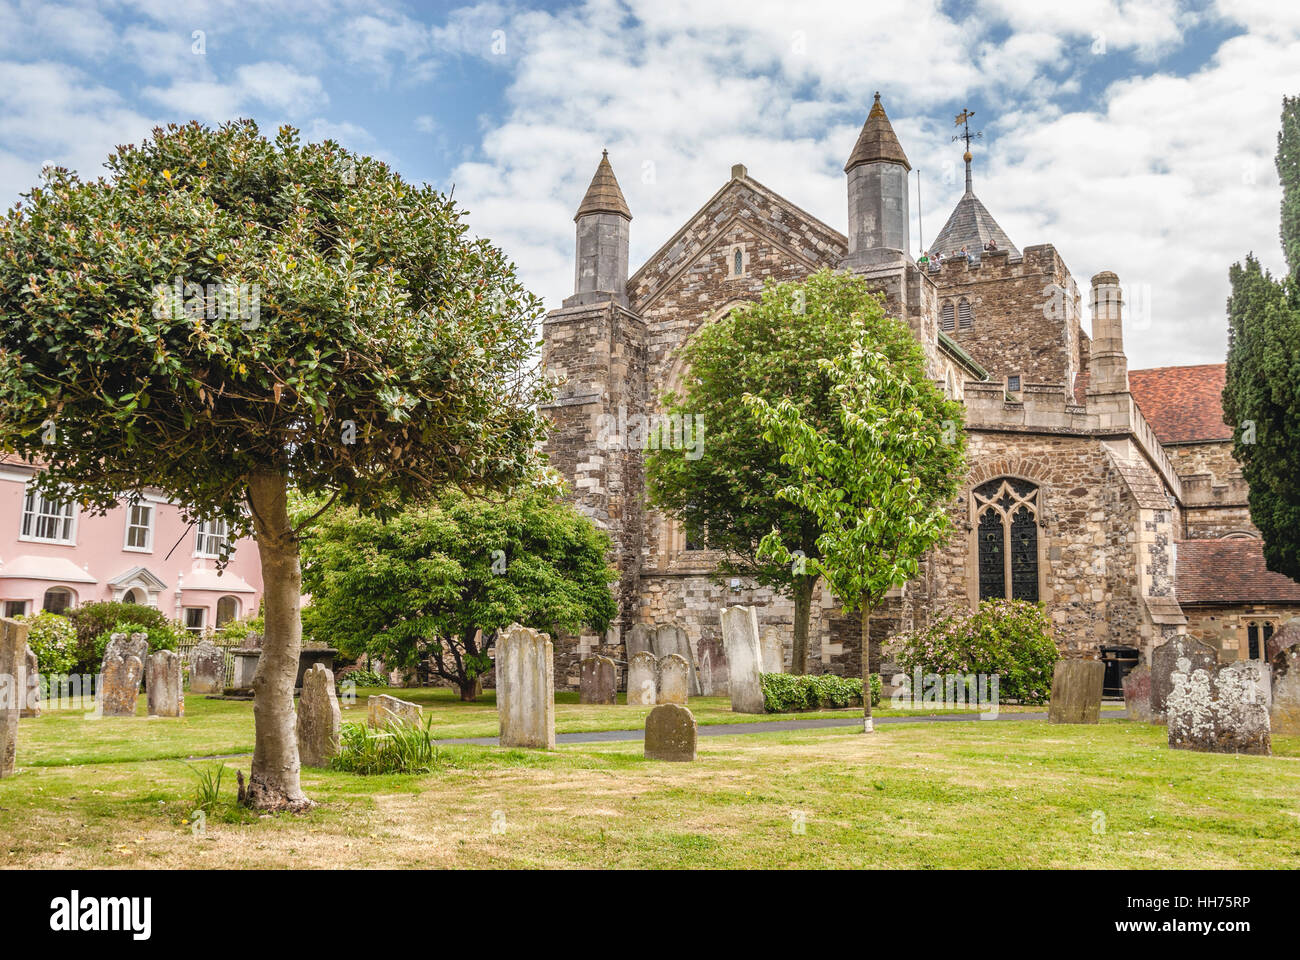 St.Mary's Church in Rye, East Sussex, England, UK Stock Photo